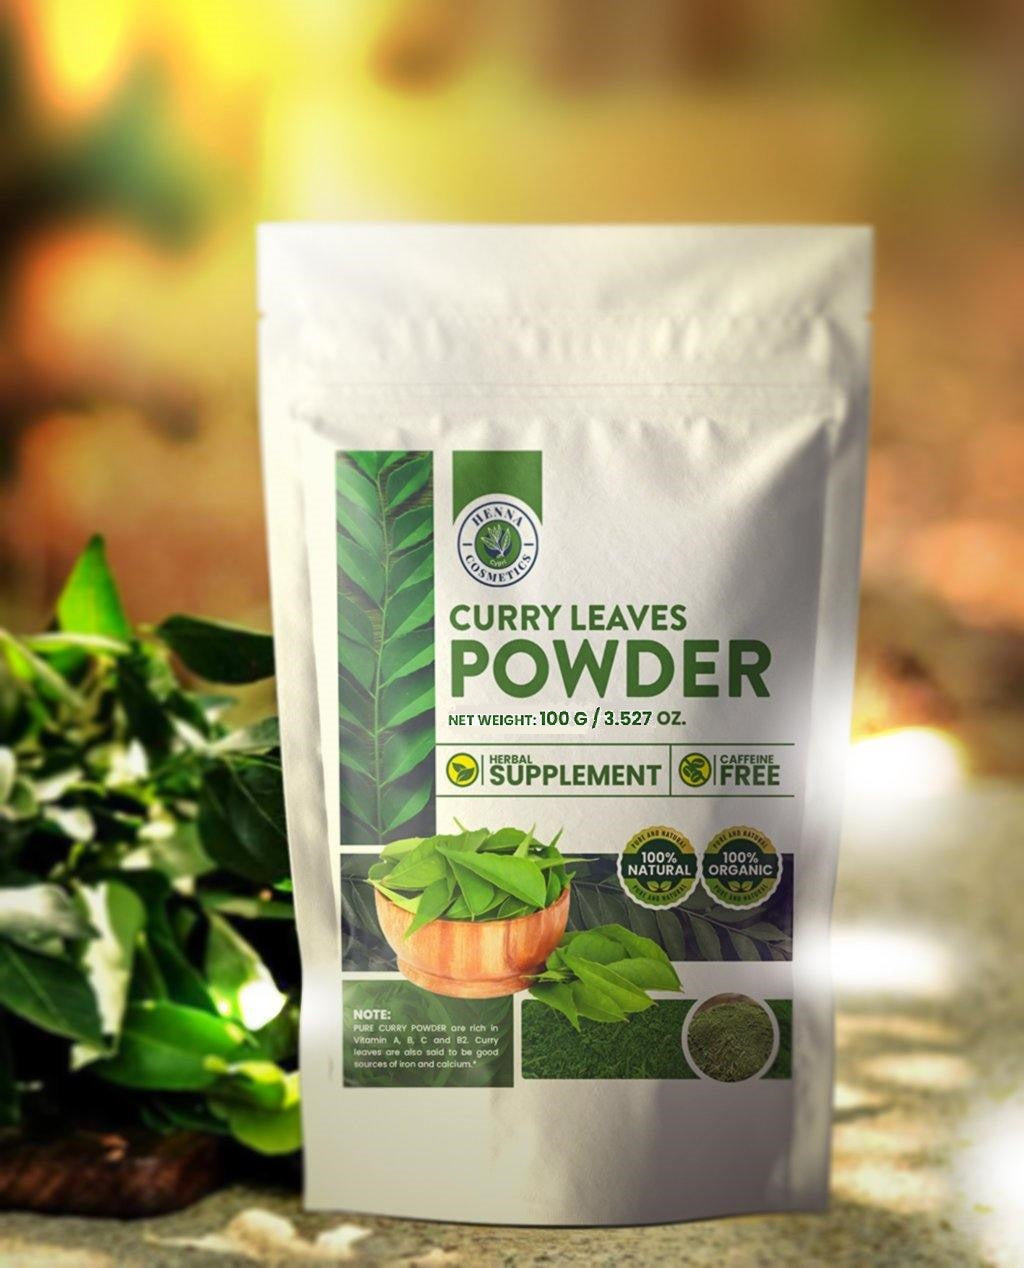 Curry Leaves Powder: A sweet, citric treat from Nature to Us.